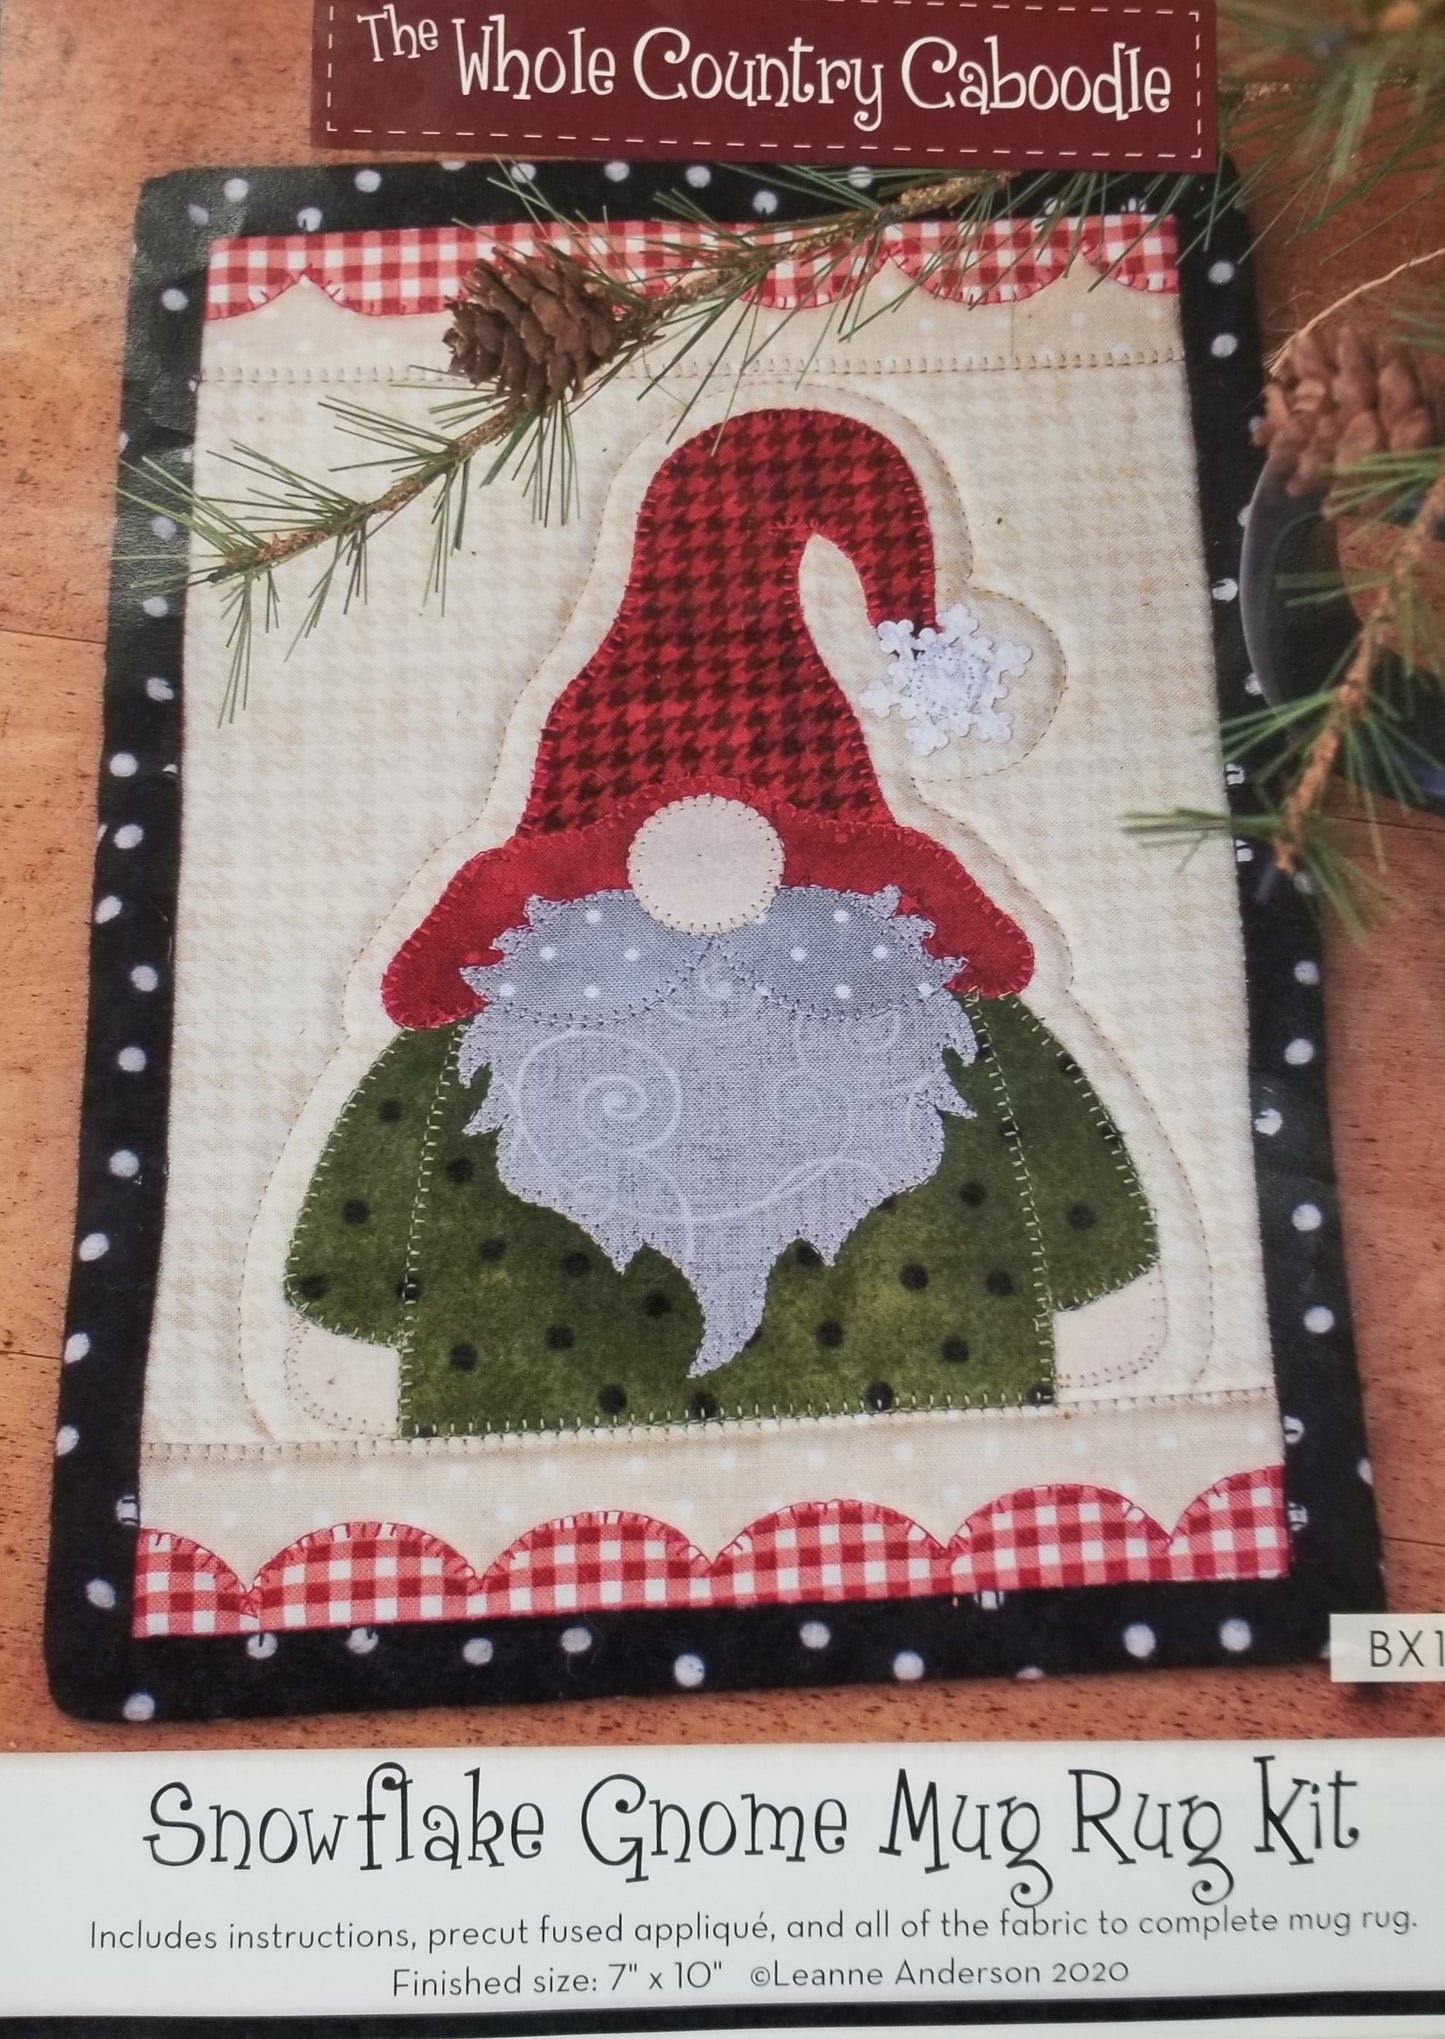 Snowflake Gnome Mug Rug Kit by The Whole Country Caboodle